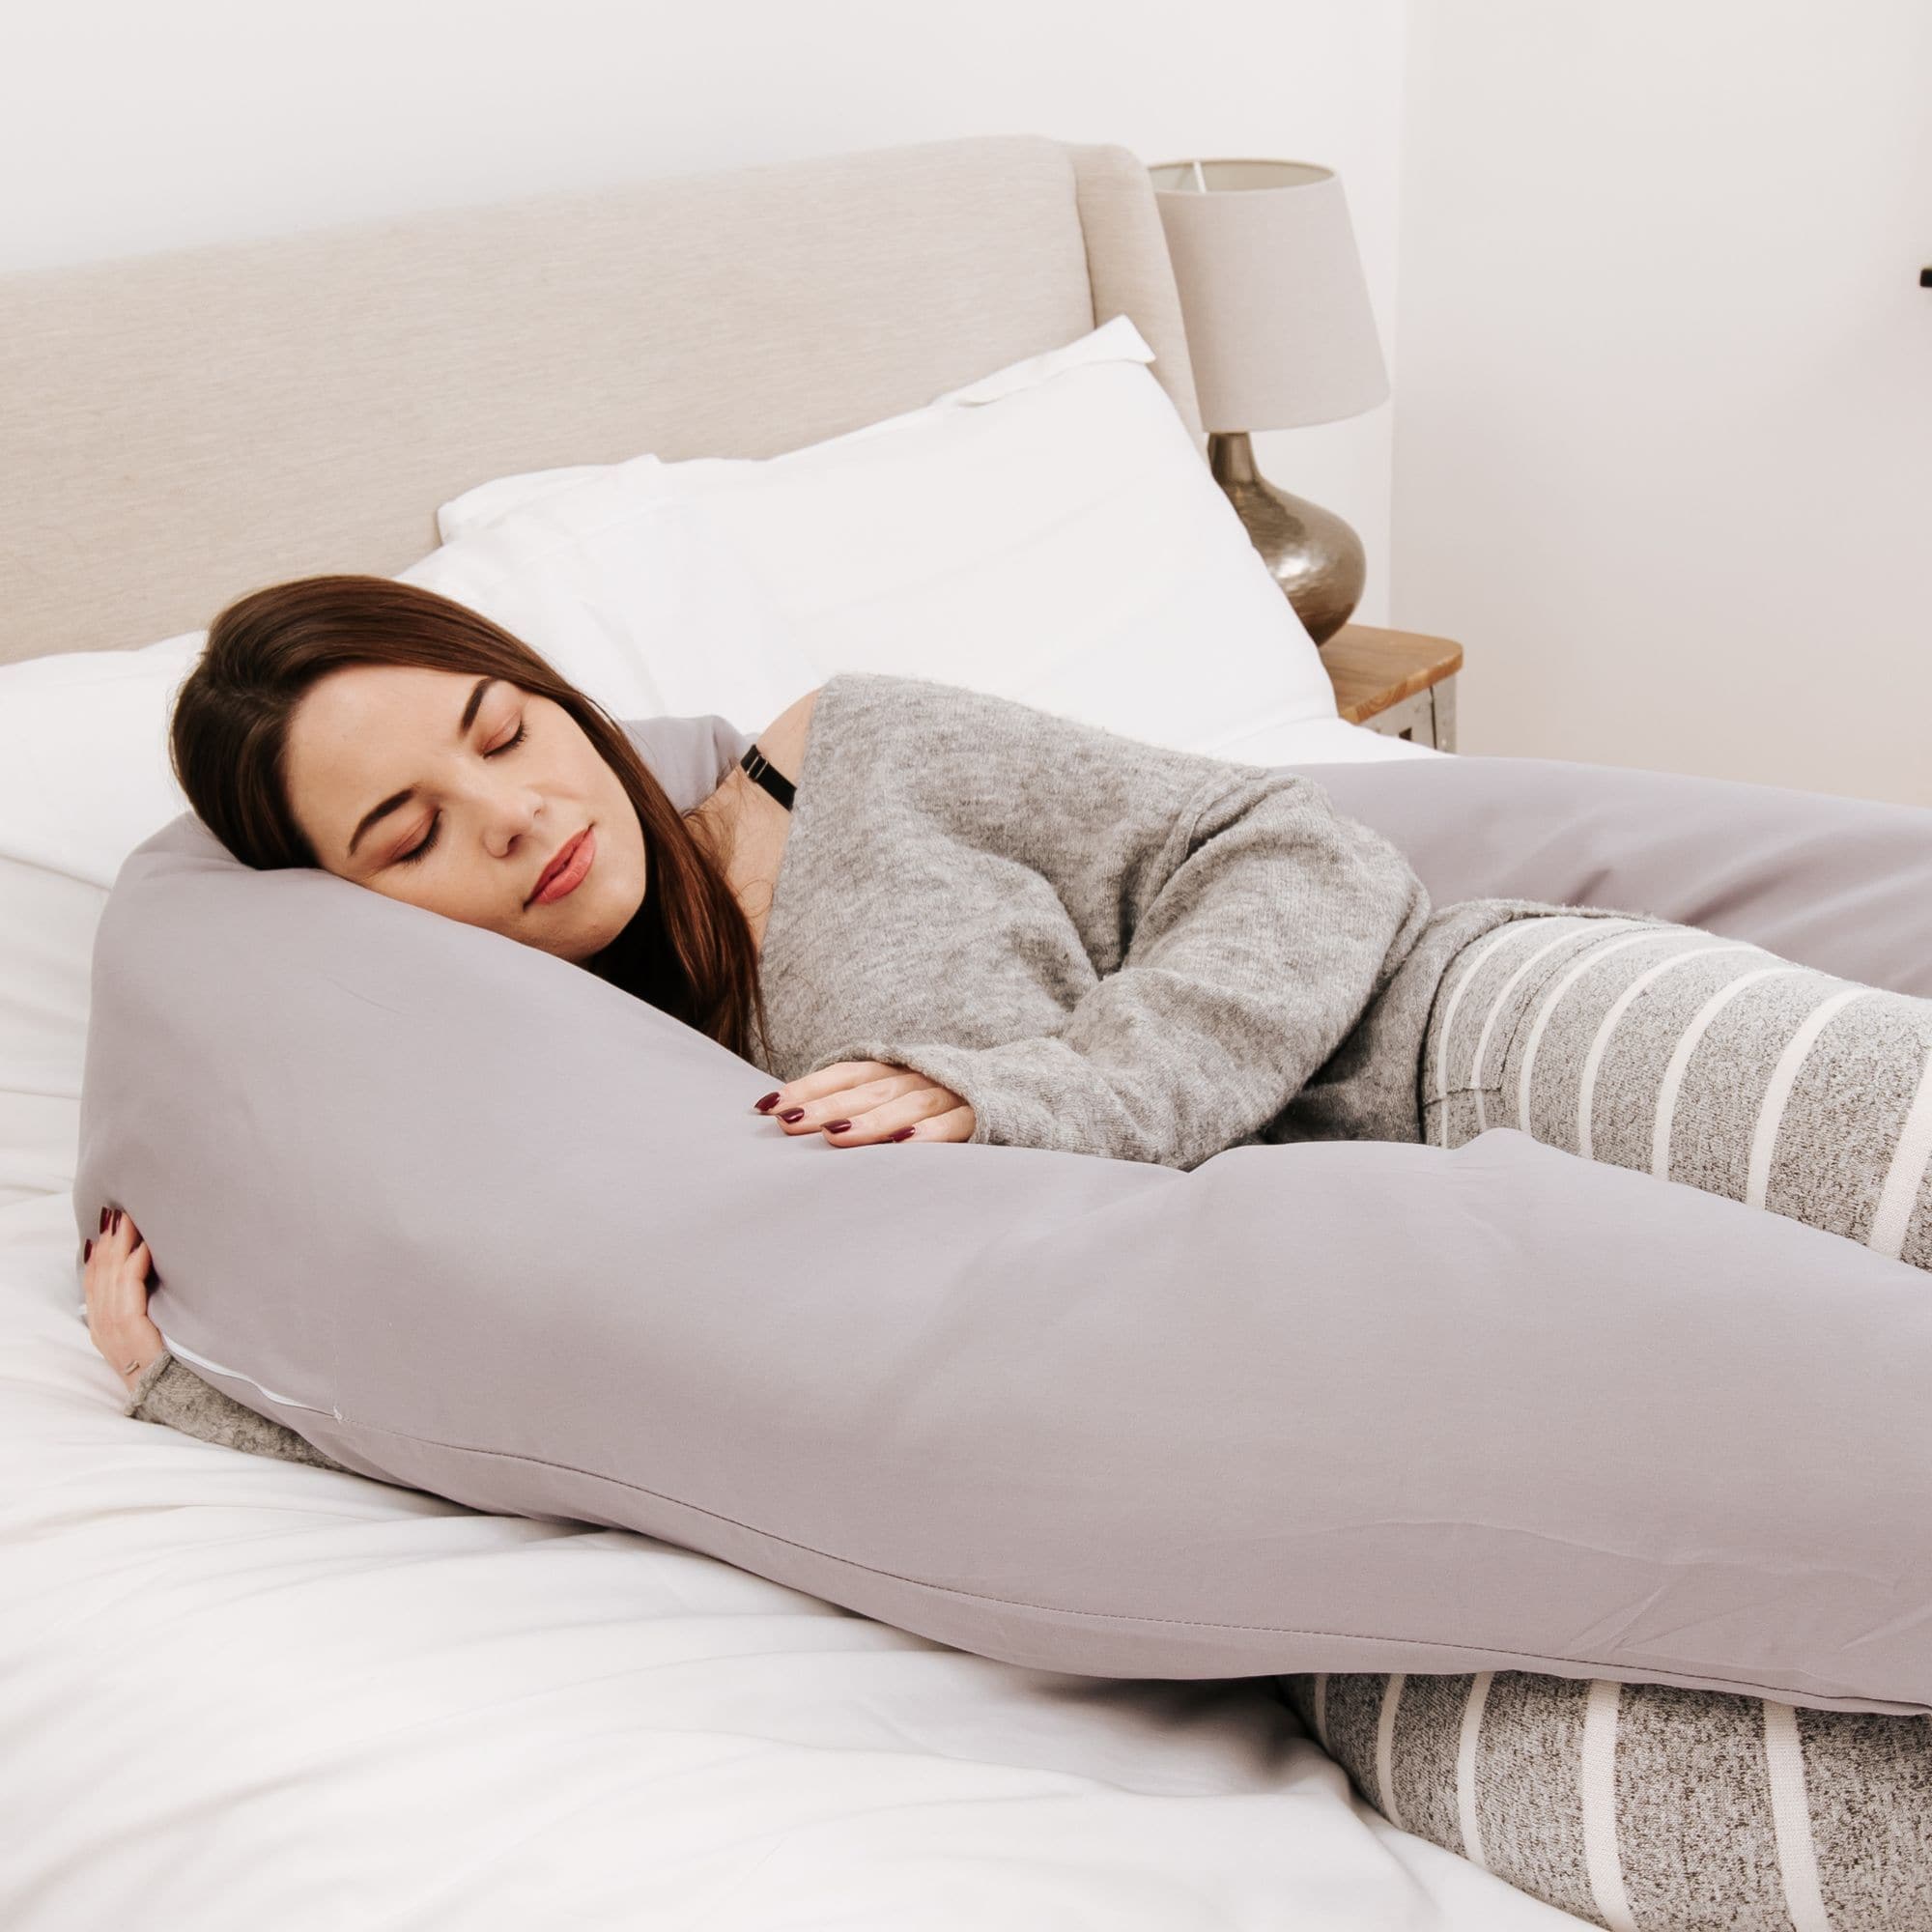 6 Ft Maternity Pillow And Case - Grey - For Your Little One